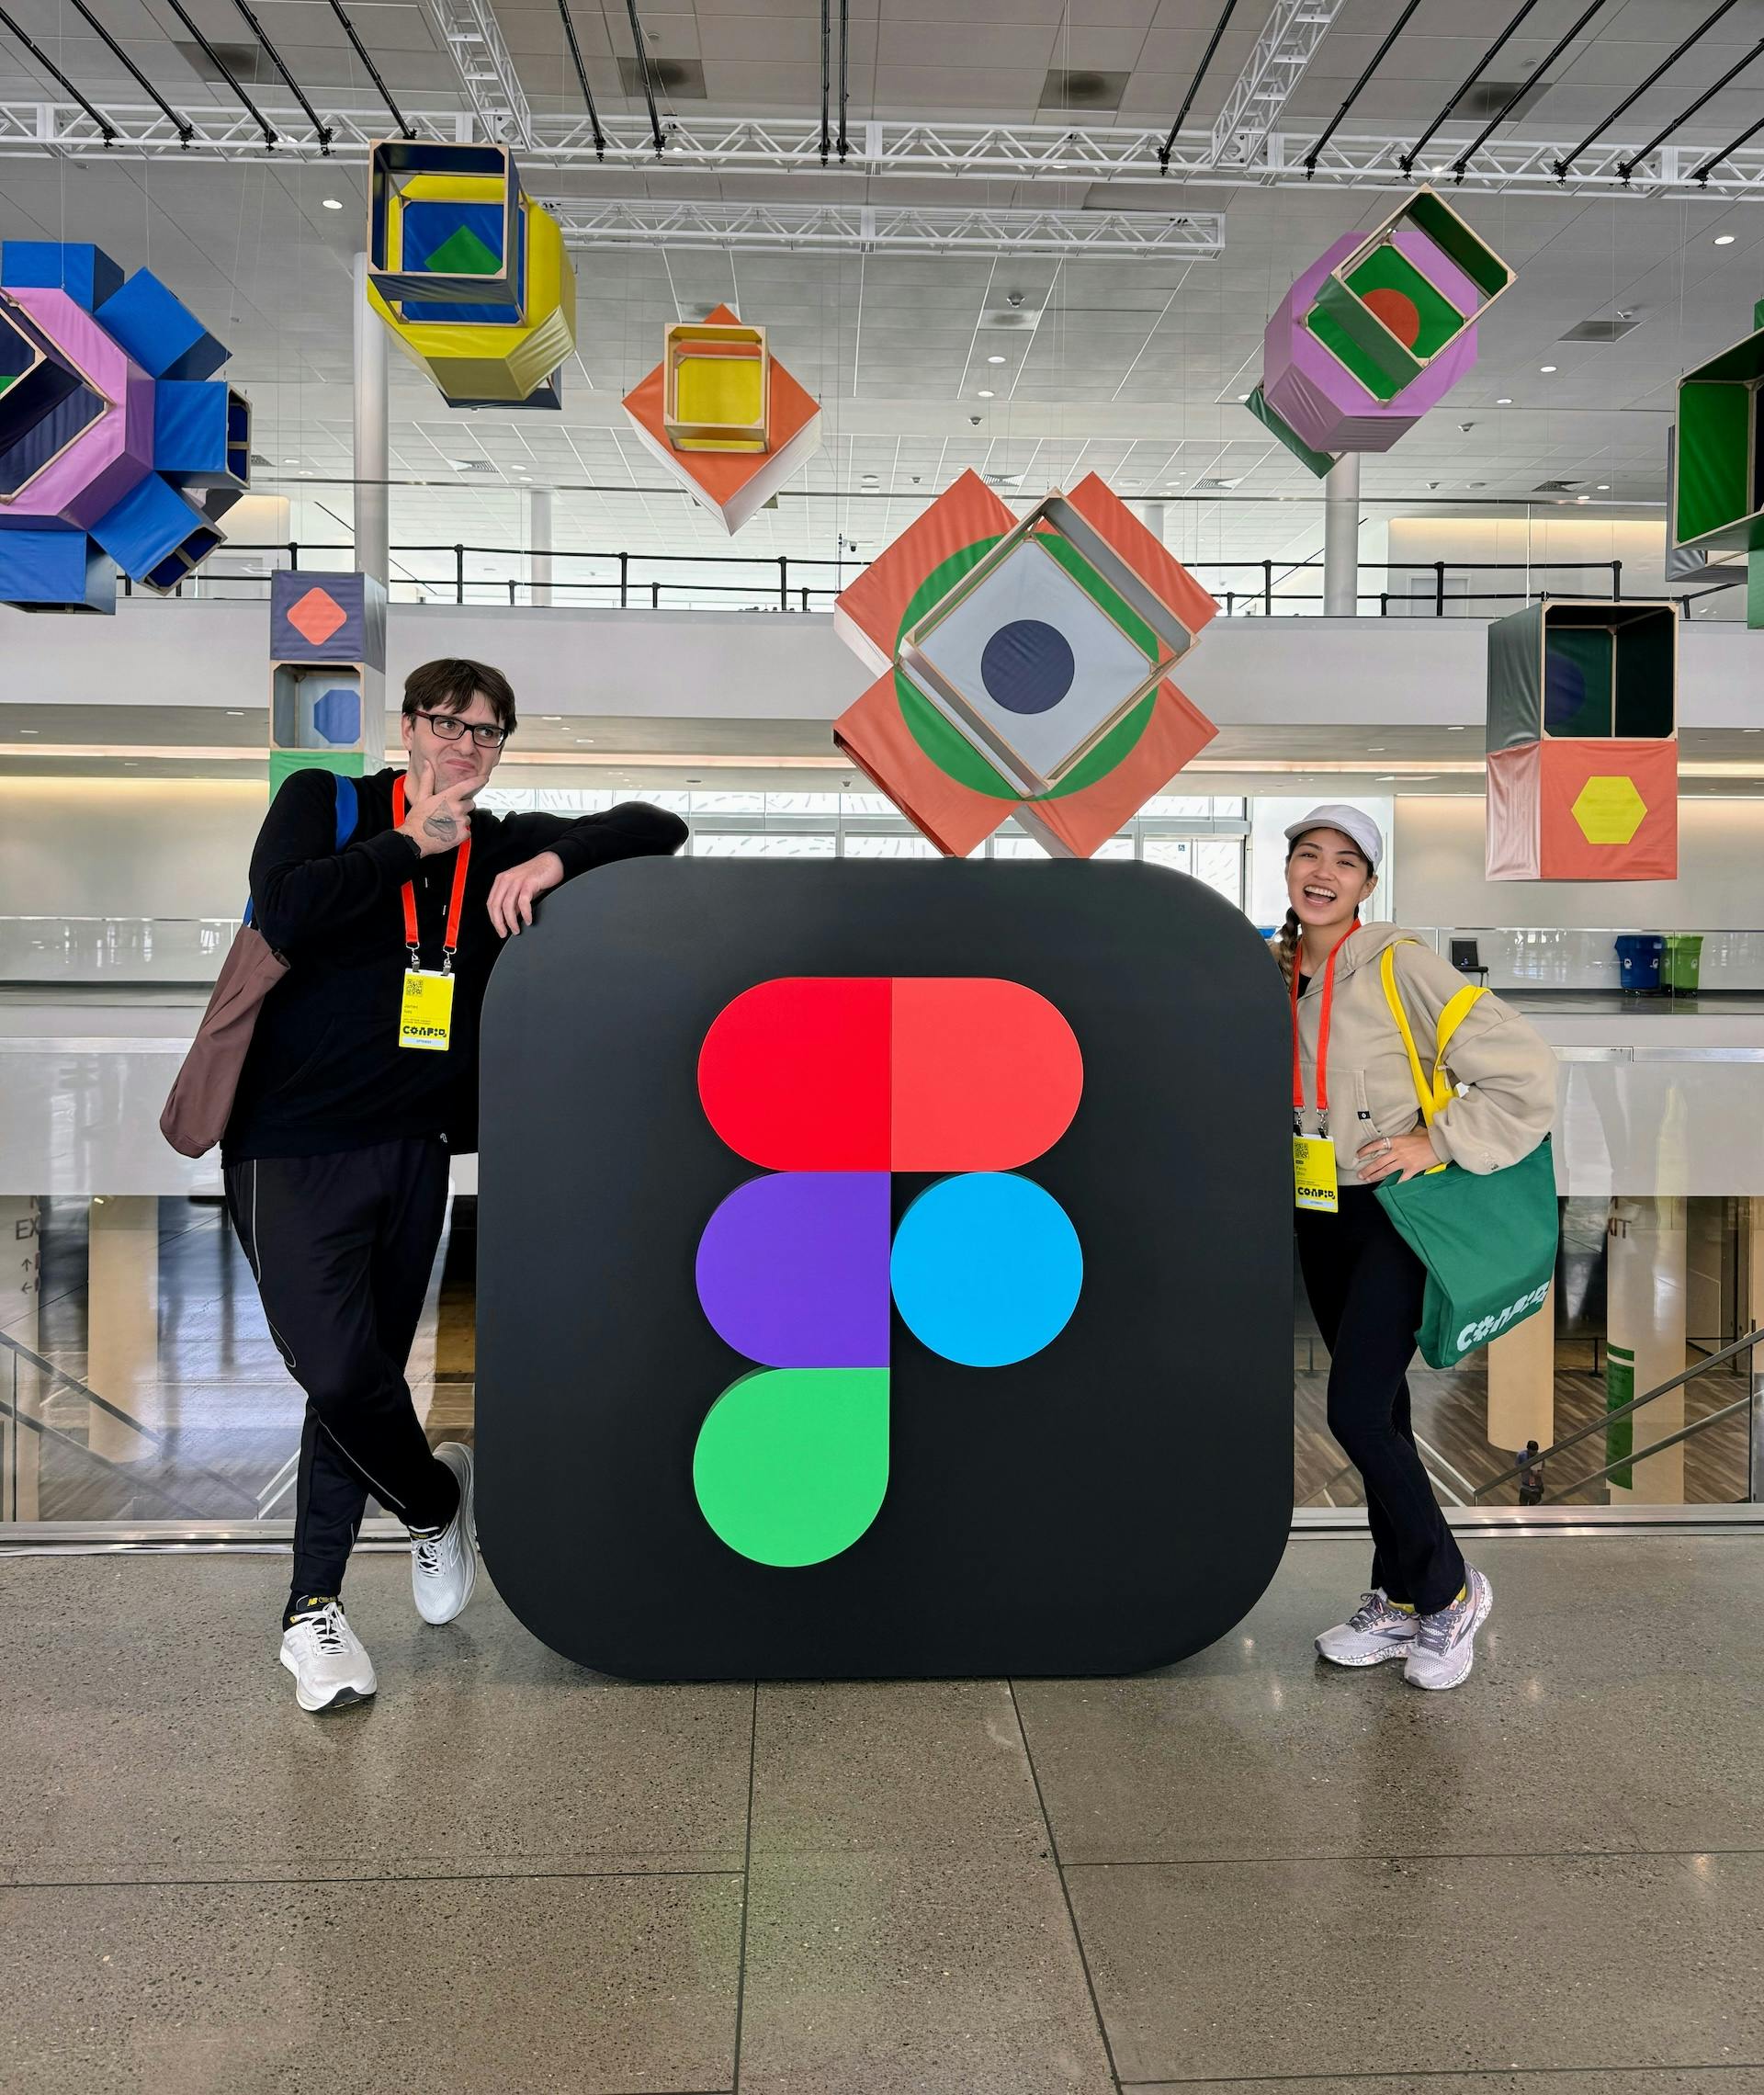 Two people standing left and right of a large Figma 'F' logo